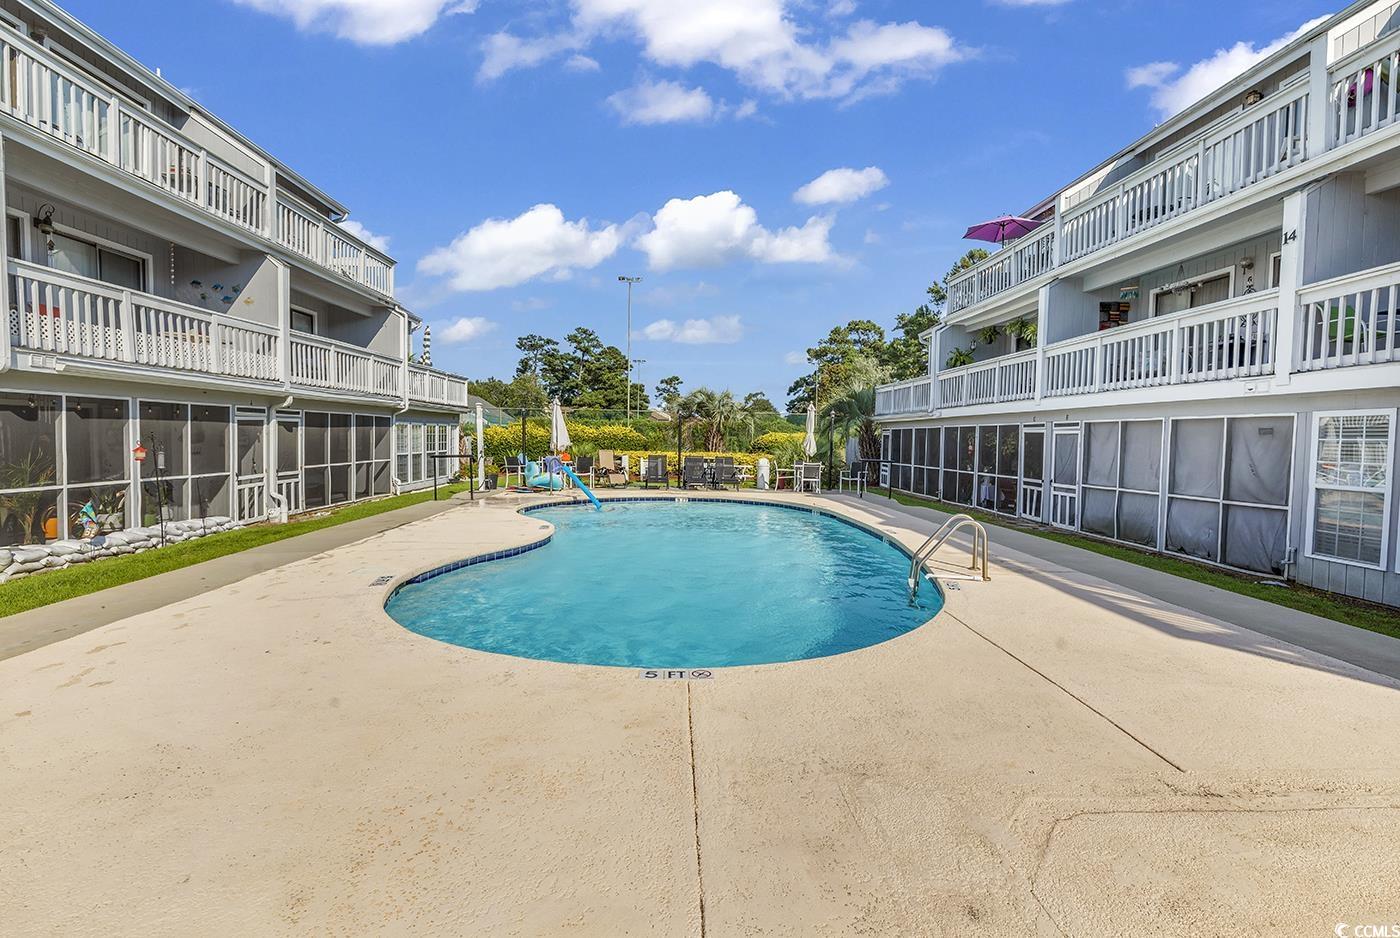 little river, sc~ furnished condo for sale with no steps (first floor) and low hoa dues!! 1br 1ba located in golf colony unit 13-l.  this lovely condo is minutes from cherry grove beach and the intra coastal waterway! it is across from a beautiful new hospital and just down the road from north myrtle beach where you can find just about any shopping + entertainment you'd want (publix, home goods, kohls, tons of boutiques and restaurants galore). you are minutes from the nc beaches like sunset beach and just a few miles from calabash. golf colony is centrally located for your enjoyment and convenient living!! this rare first floor condo has a beautiful view of the pool from the living room & kitchen area as well as the screen room. enjoy your morning coffee while sitting on the cozy screen room! the  doors and windows are updated! the kitchen offers updated cabinets and white appliances to match the cabinets. there is a cozy dining area and a spacious living room! the lr, kitchen, and dining all overlook the beautiful pool! the large bedroom offers  a good sized closet, updated paint, and a large window which is nice for natural light. the bathroom has a good sized vanity with cabinetry for storage! there is a spacious pantry and a storage area where the water heater is located. the screen porch overlooks the stunning pool and lavish landscaping which is there for your enjoyment but without the hassle of cleaning and maintaining (this is done by the hoa). the laundry area has a stackable washer/dryer which will stay.  the pool was recently updated with concrete poured around exterior and hand rails added for easier access. the common area in the back is beautifully landscaped and maintained by the hoa. you are allowed to short term rent (3 day minimum) and long term rent. there are newer mailboxes that were recently installed for all the owners. if you are looking for an affordable way to live or stay at the beach you'll want to take a look at this awesome condo before it gets away!! please contact your realtor to get the rules/ regulations/ details of the hoa. address: 3700 golf colony dr. unit 13-l (first building in golf colony on the left)  little river, sc 29566